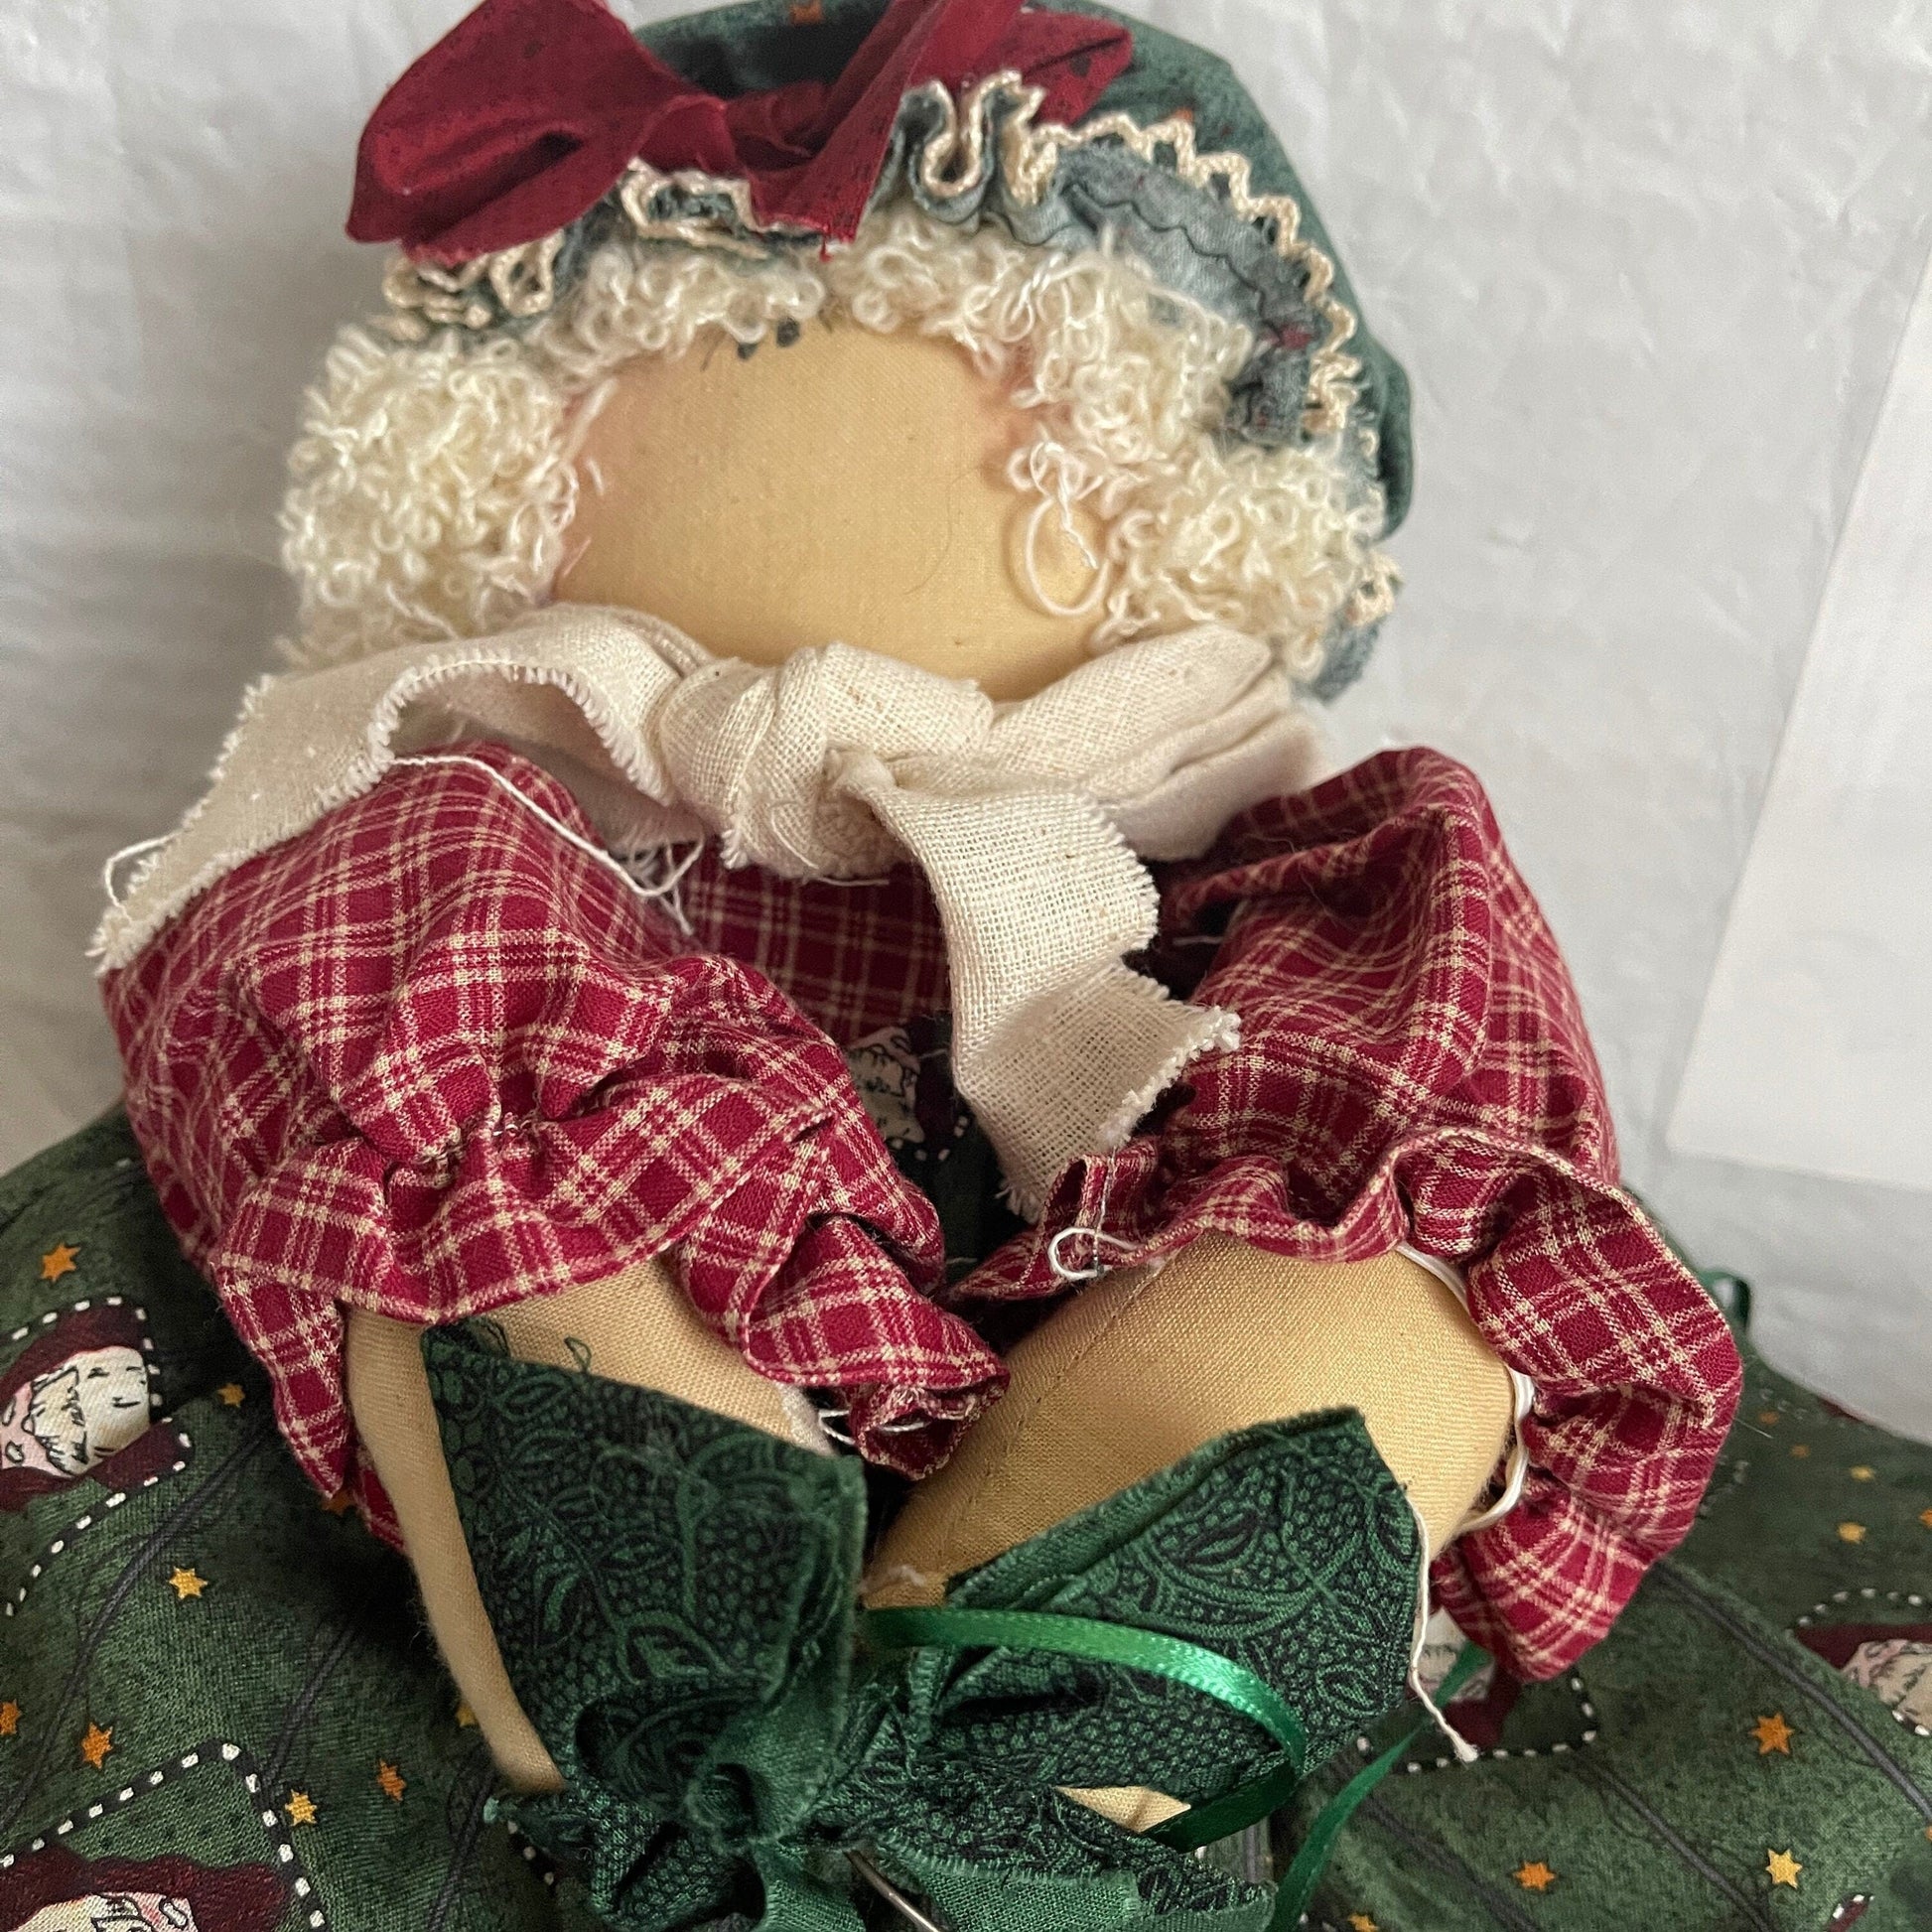 Primitive Hand Made Christmas Rag Doll Holding a Wooden Stocking Ornament 17 Inches Tall